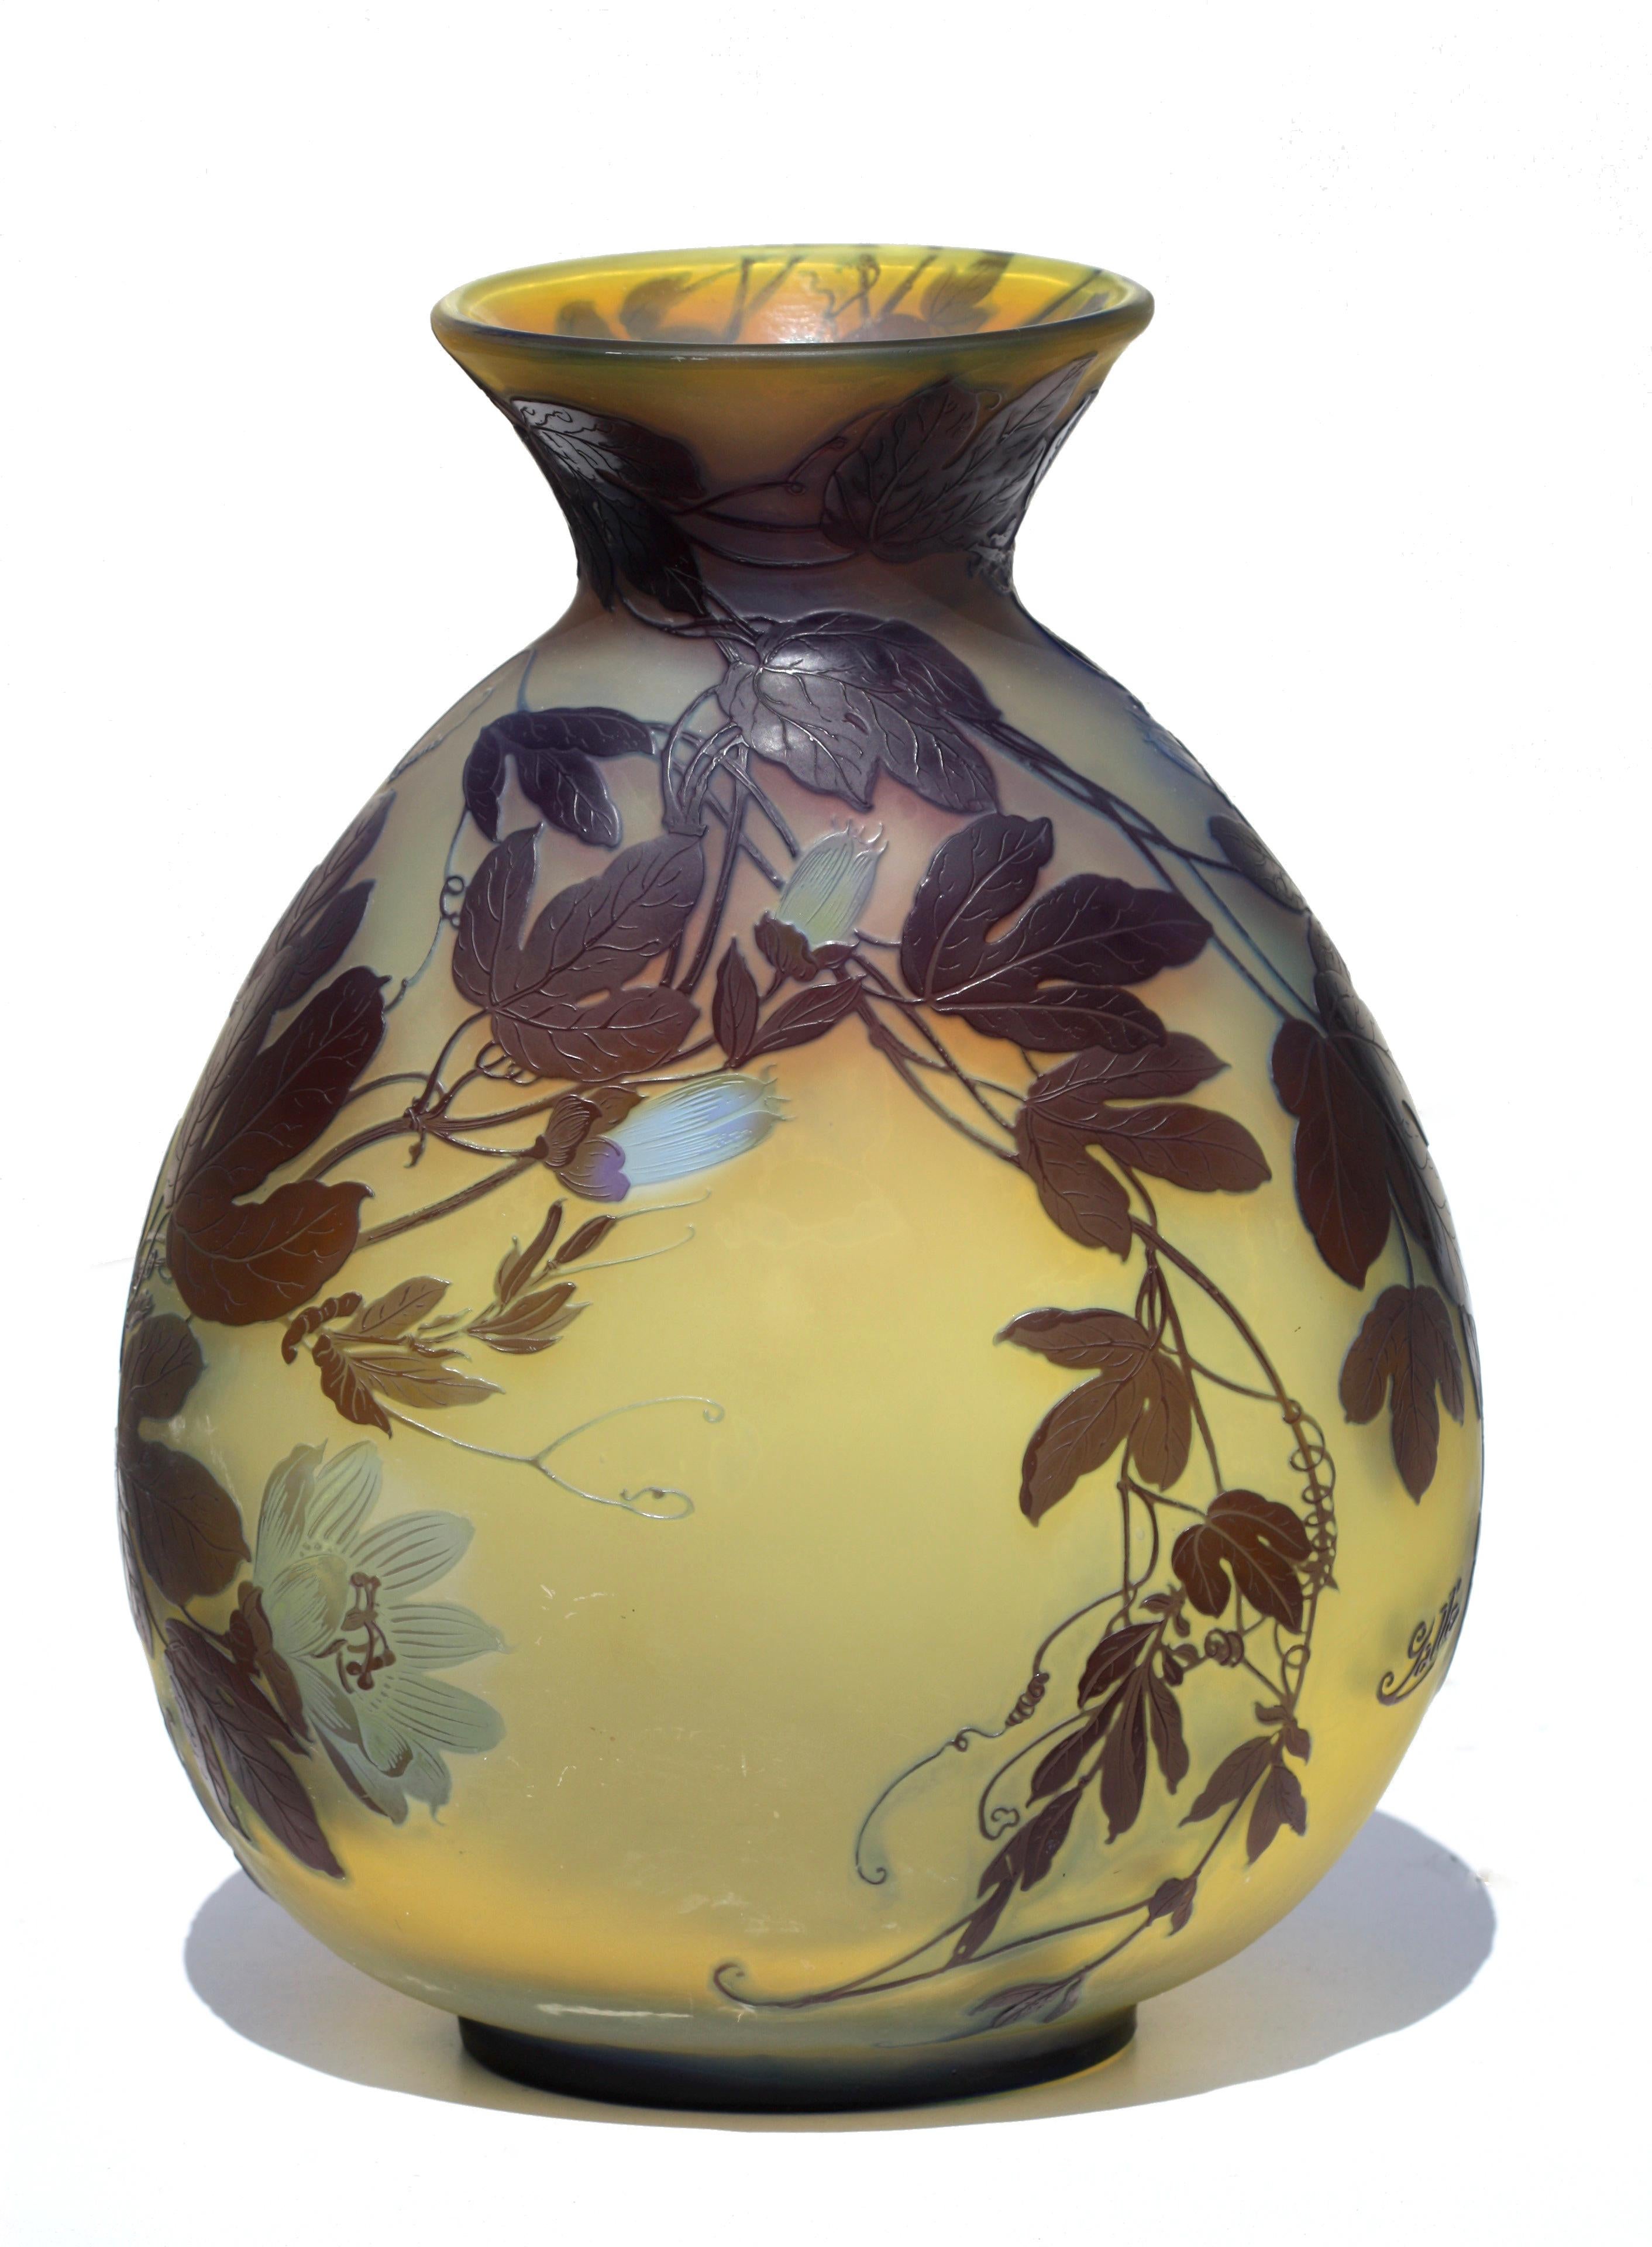 Émile Gallé
An impressive Gallé cameo glass vase
circa 1900
colourless glass with a degrading amber layer overlaid in brown and pale green, etched and cut with pendant flower blossoms
cameo mark 'Gallé'
underside stamped 
Fabrication